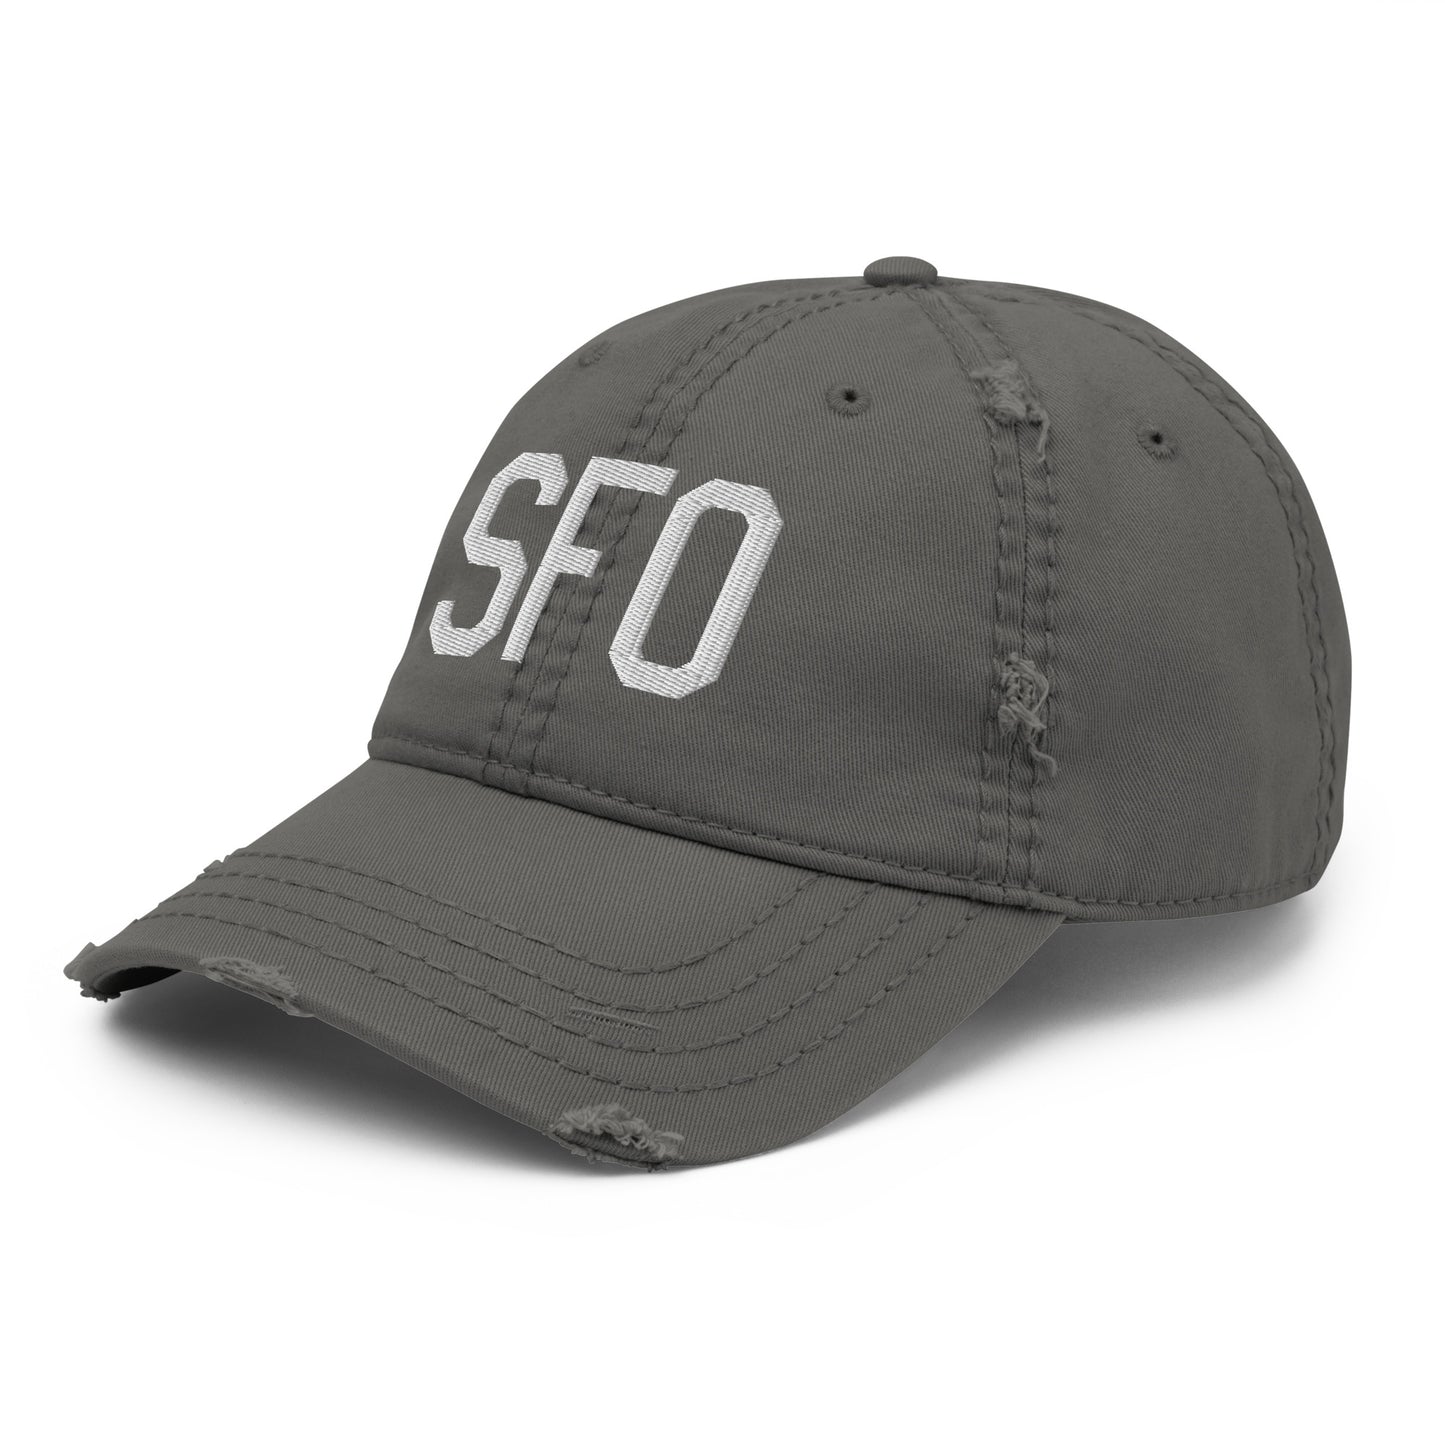 Airport Code Distressed Hat - White • SFO San Francisco • YHM Designs - Image 16